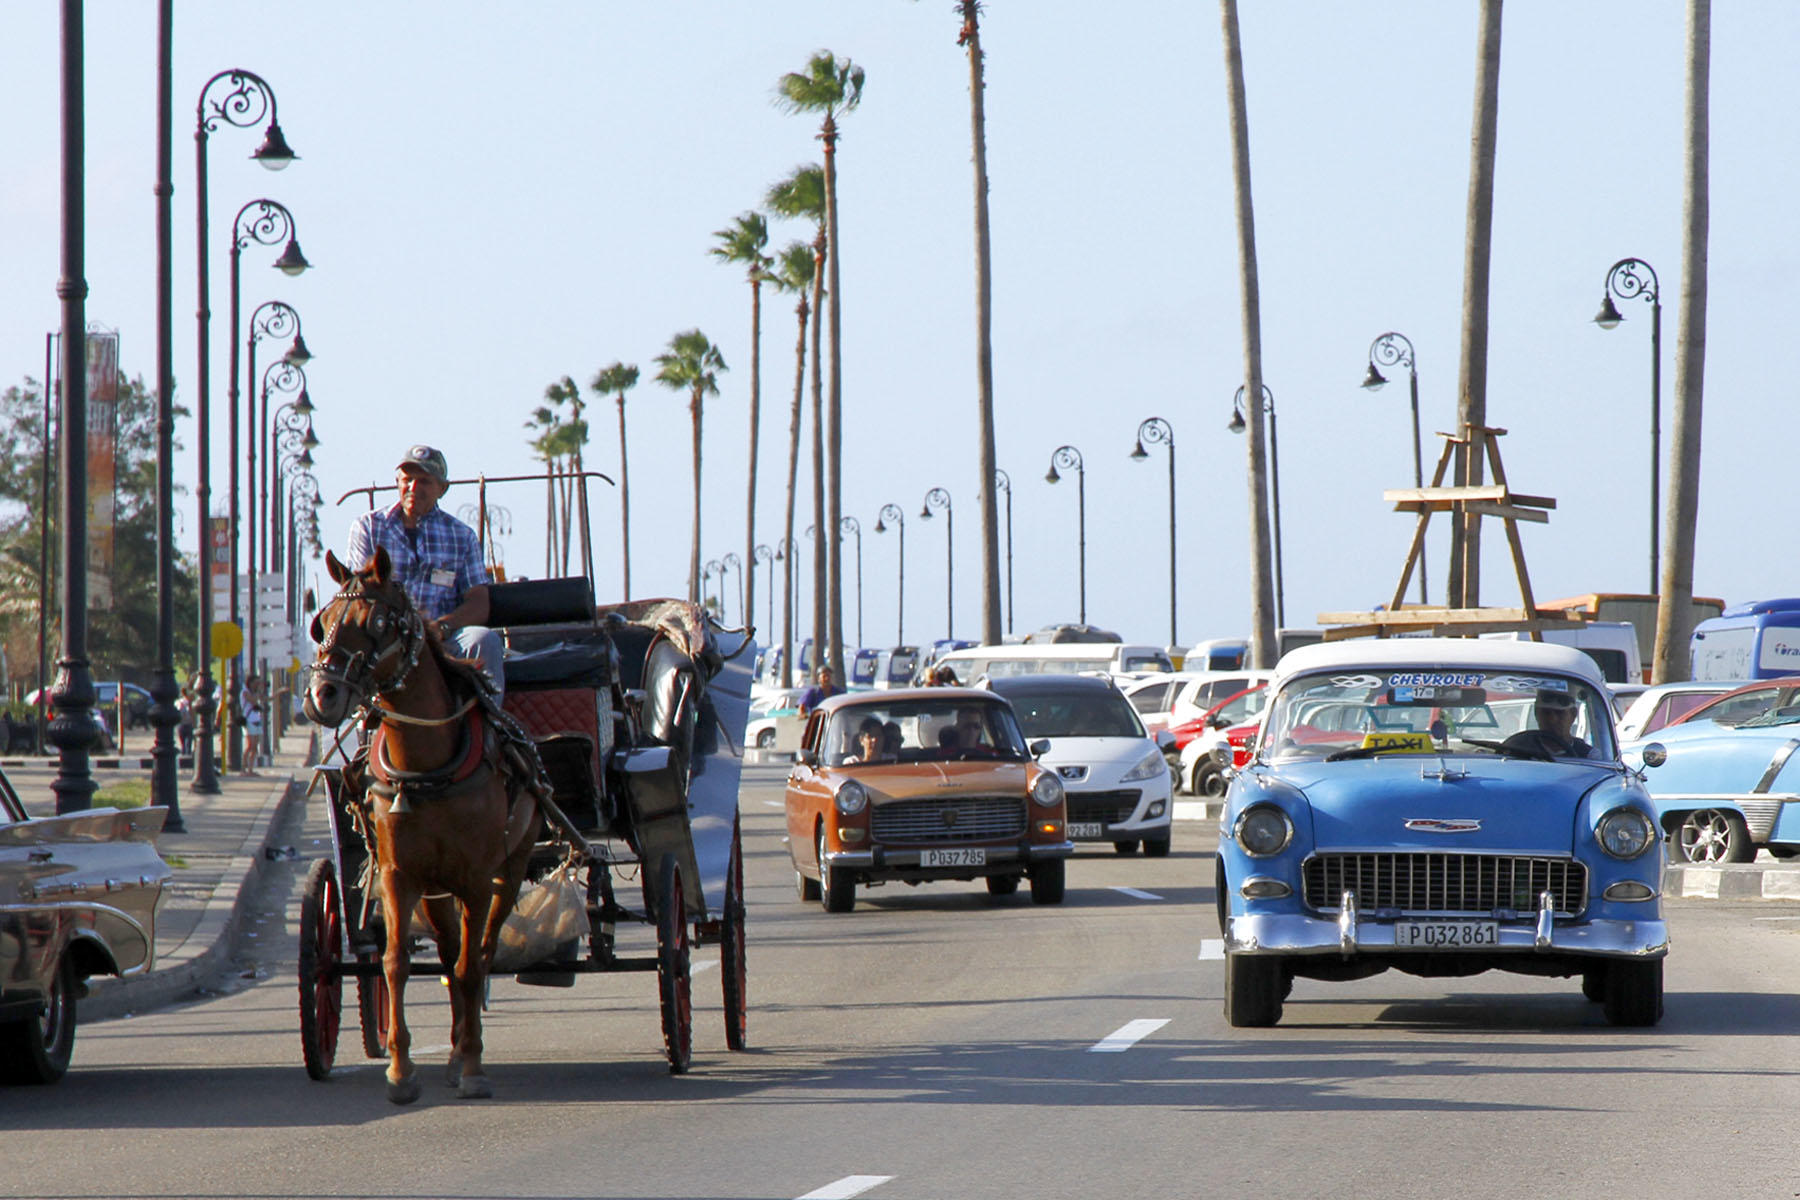 Horse, Lada, Chevy on Malecon